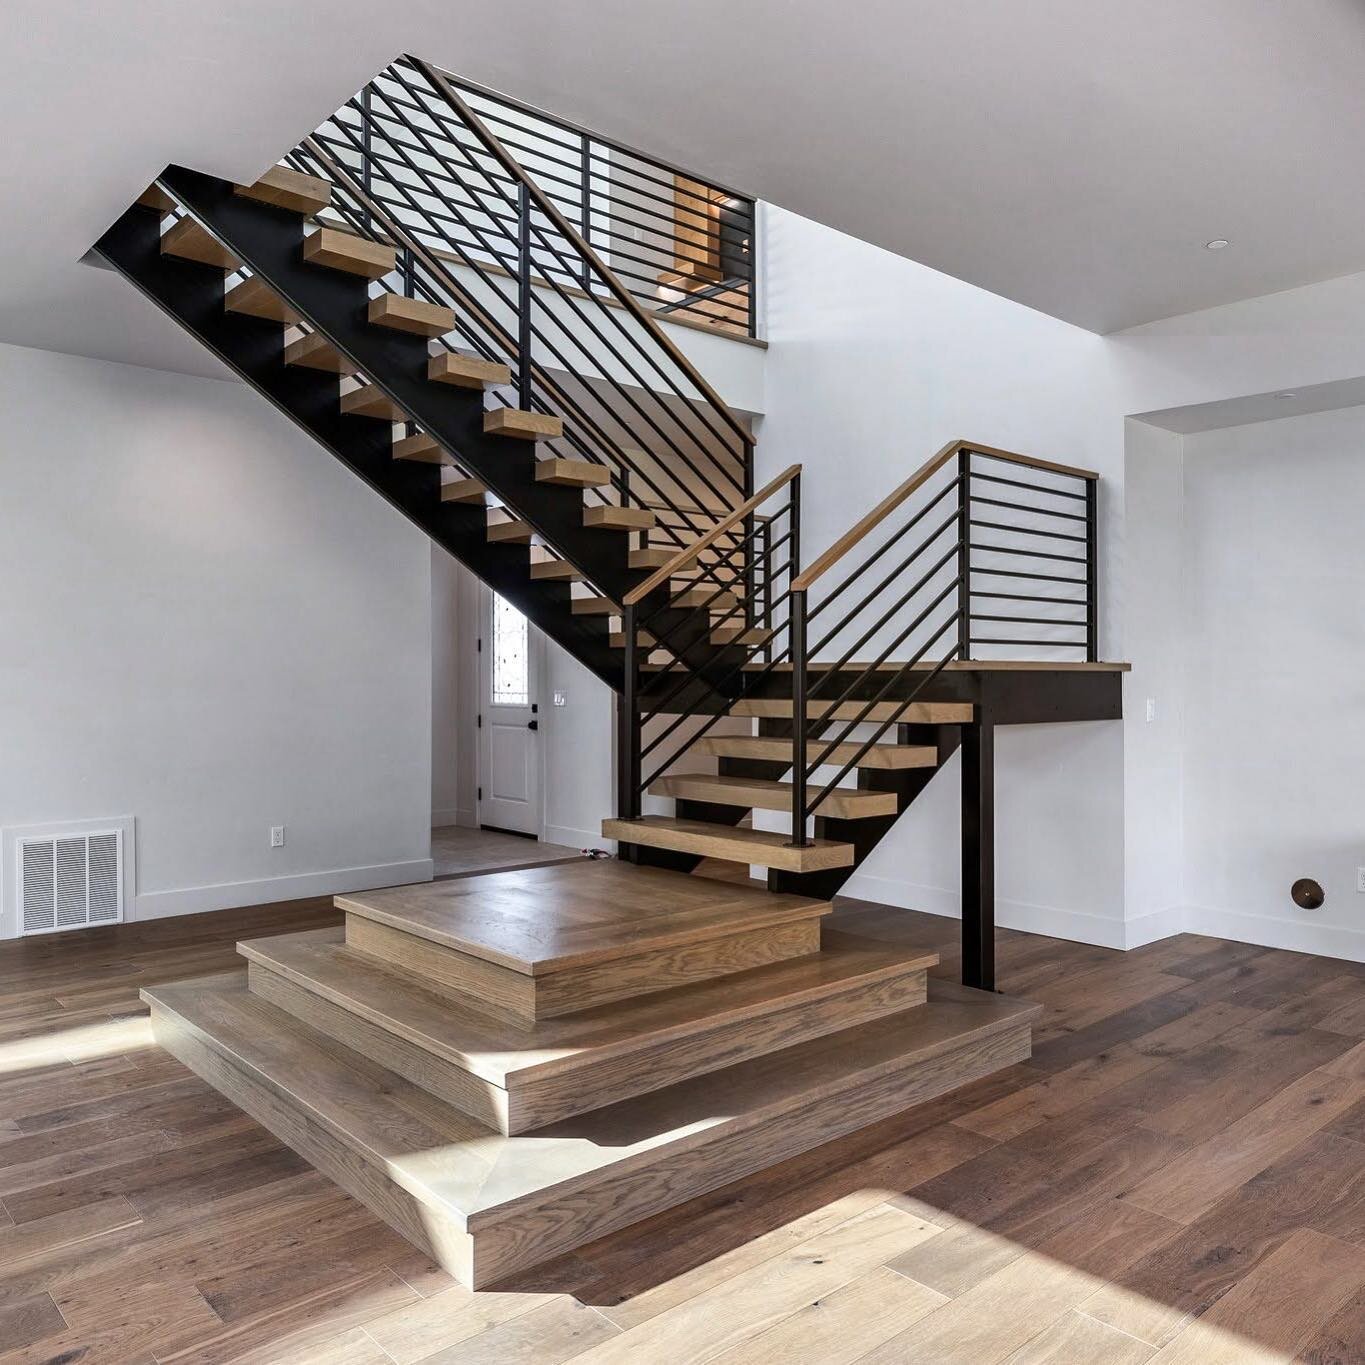 Proud of this one! Floating stairs with our signature box tread and the metal railing makes this home truly unique! Happy to flex some creative muscle on this one! What do you think? 

📸 cred: @mccartermoorhouse